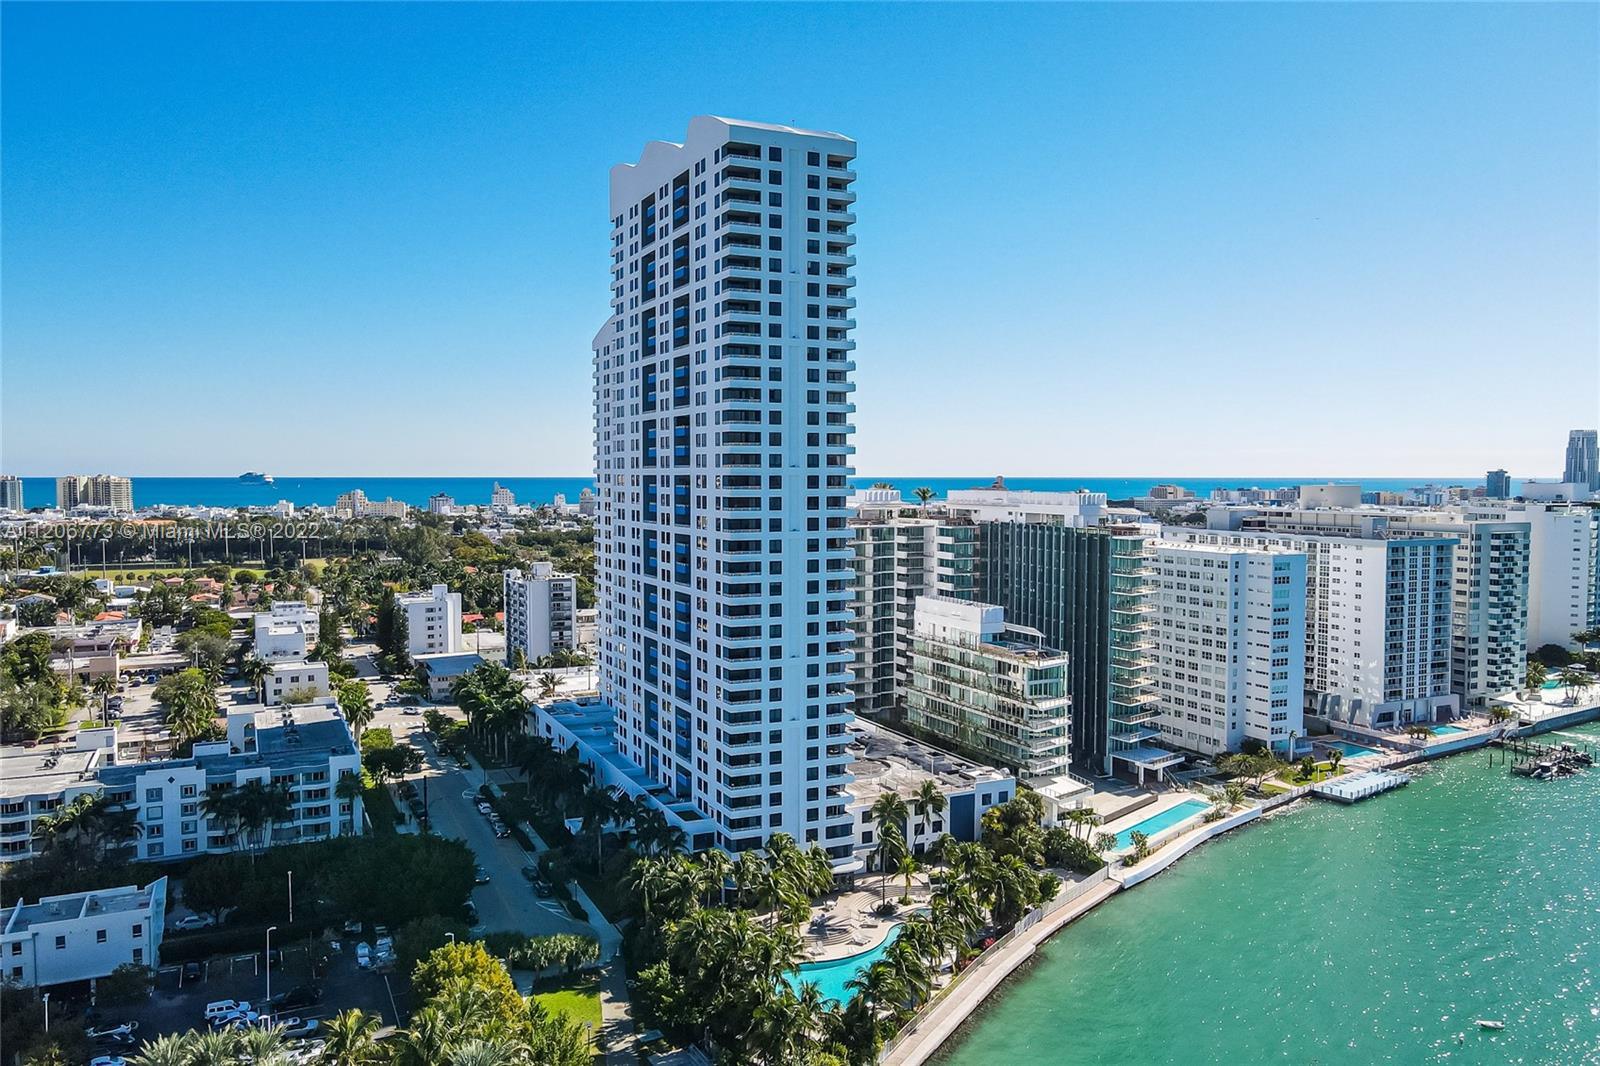 Set in the heart of trendy South Beach's West Ave neighborhood, this newly renovated condo offers be